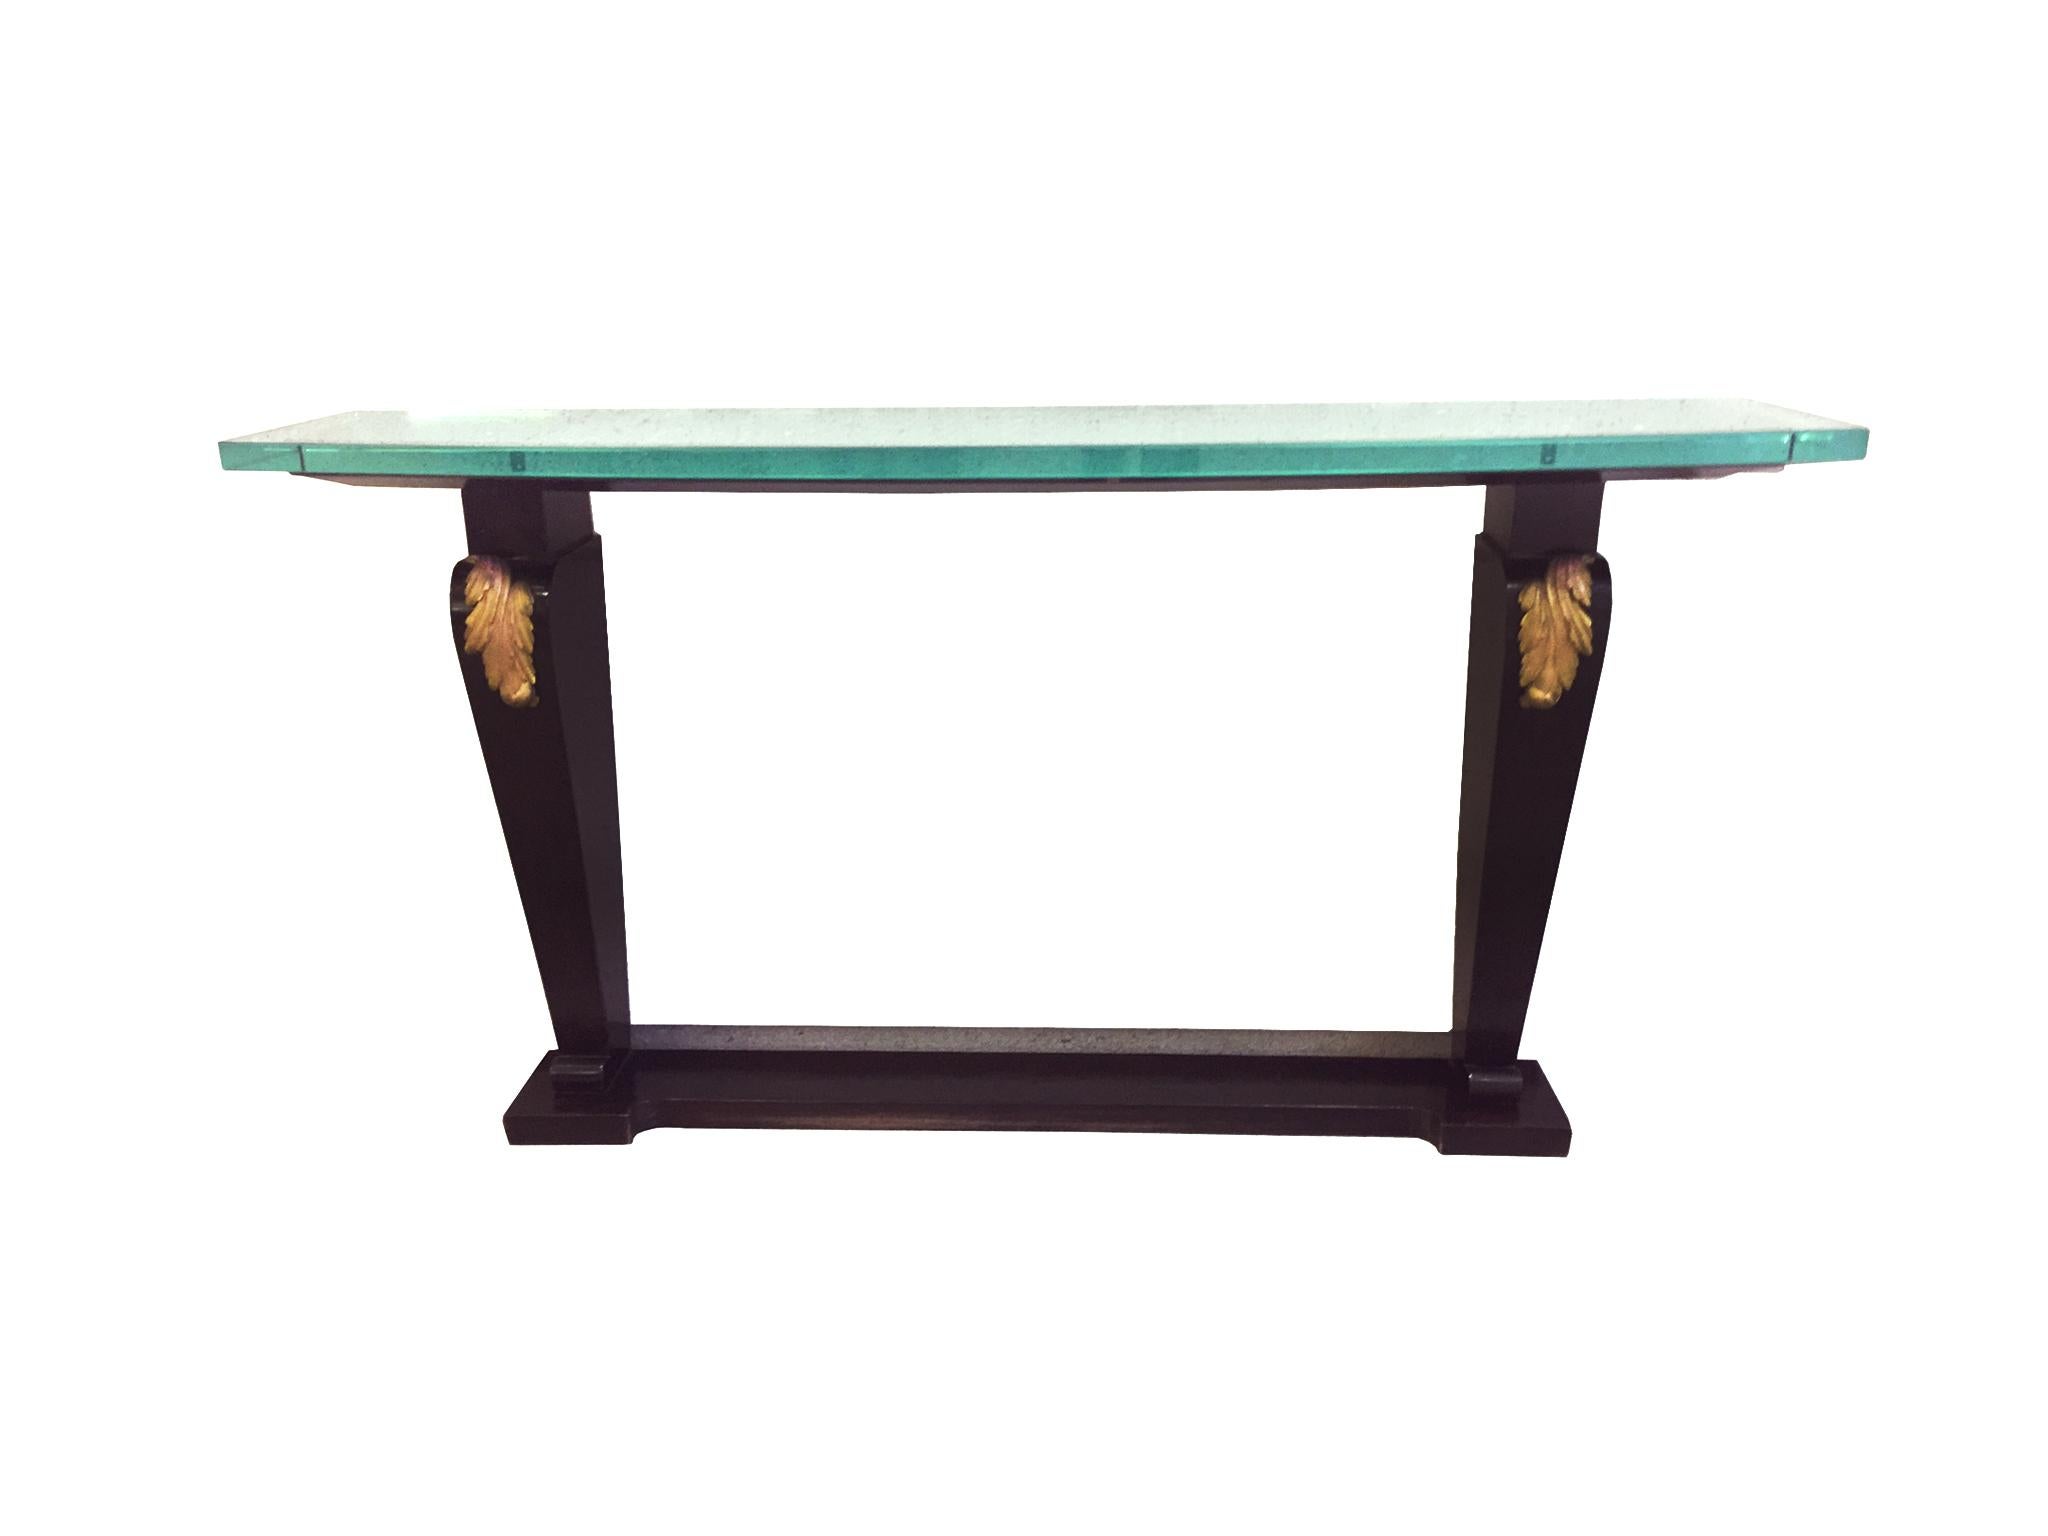 An elegant console table comprising of an ebonized wood base and a glass tabletop. Structurally, the base is designed with two column legs fastened together with a stretcher base, while the glass top curves outward at the front and cut straight at